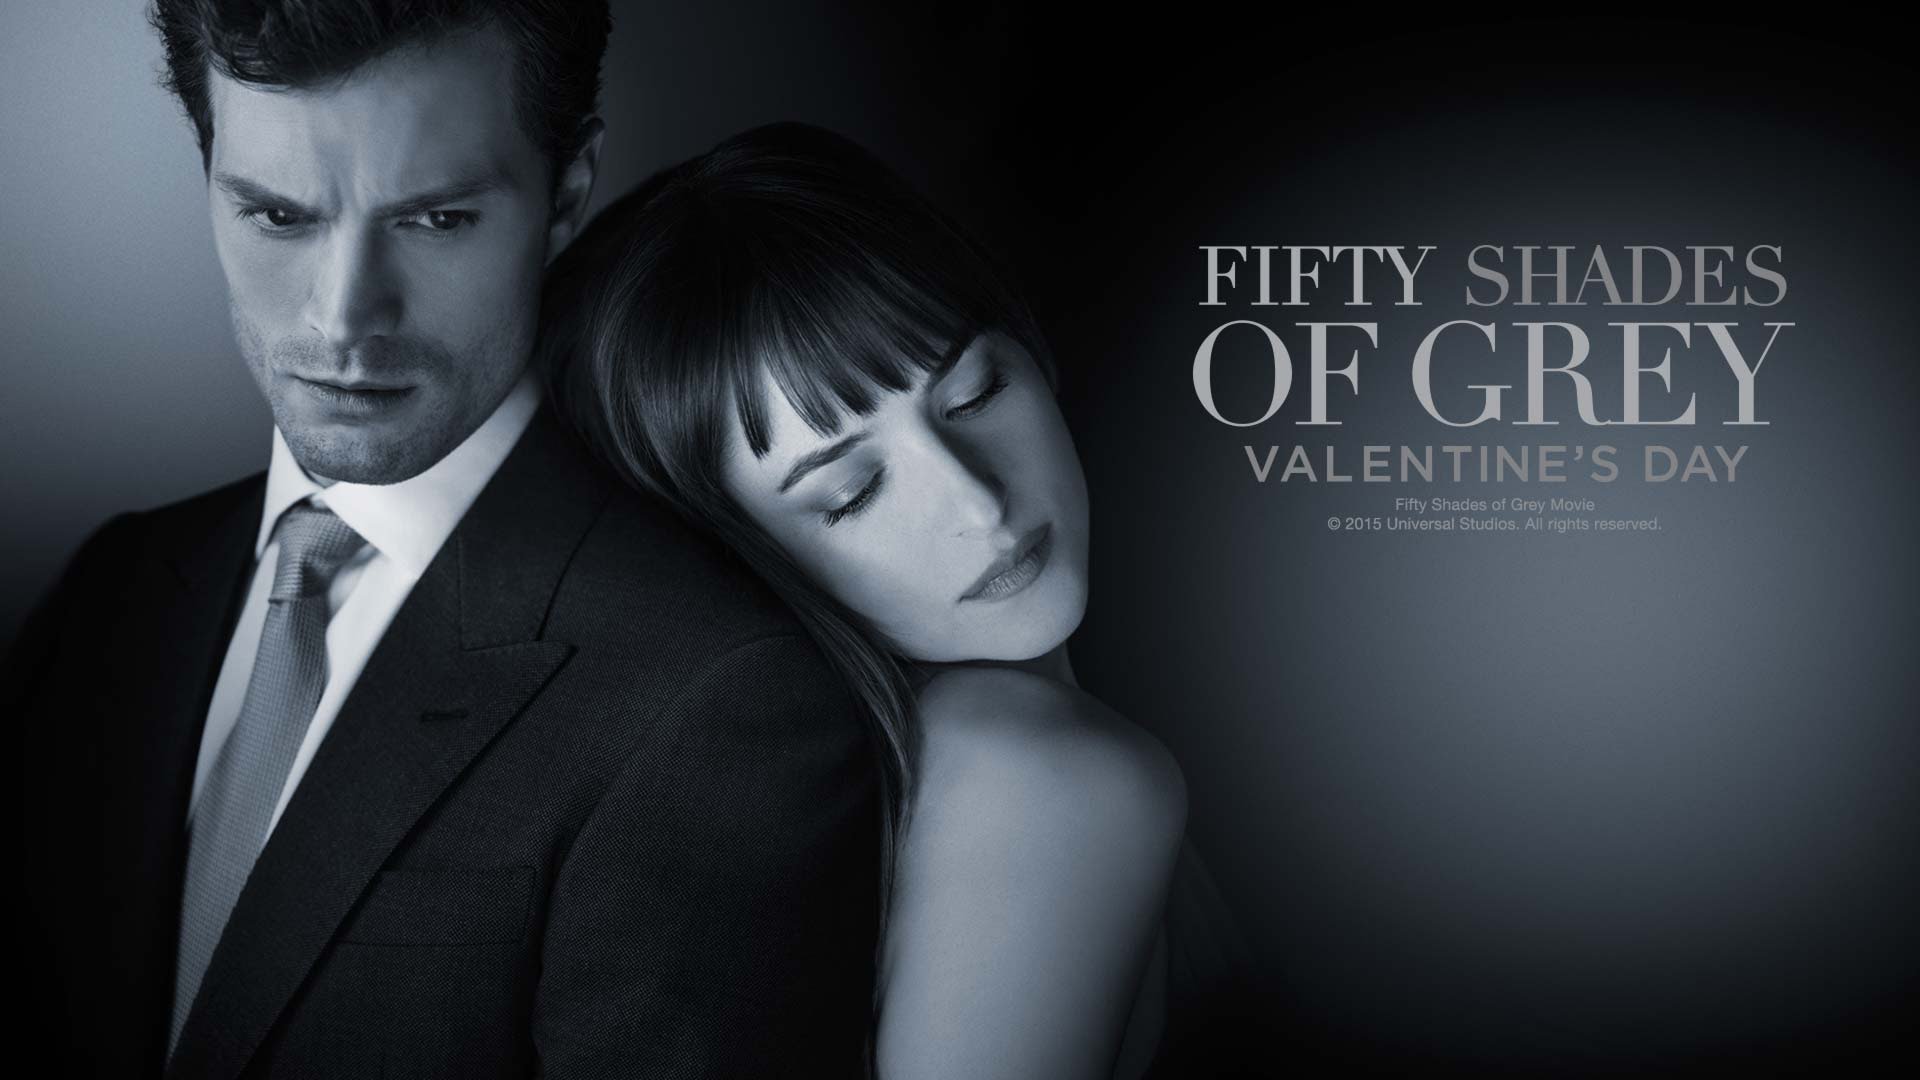 High Resolution Wallpaper | Fifty Shades Of Grey 1920x1080 px